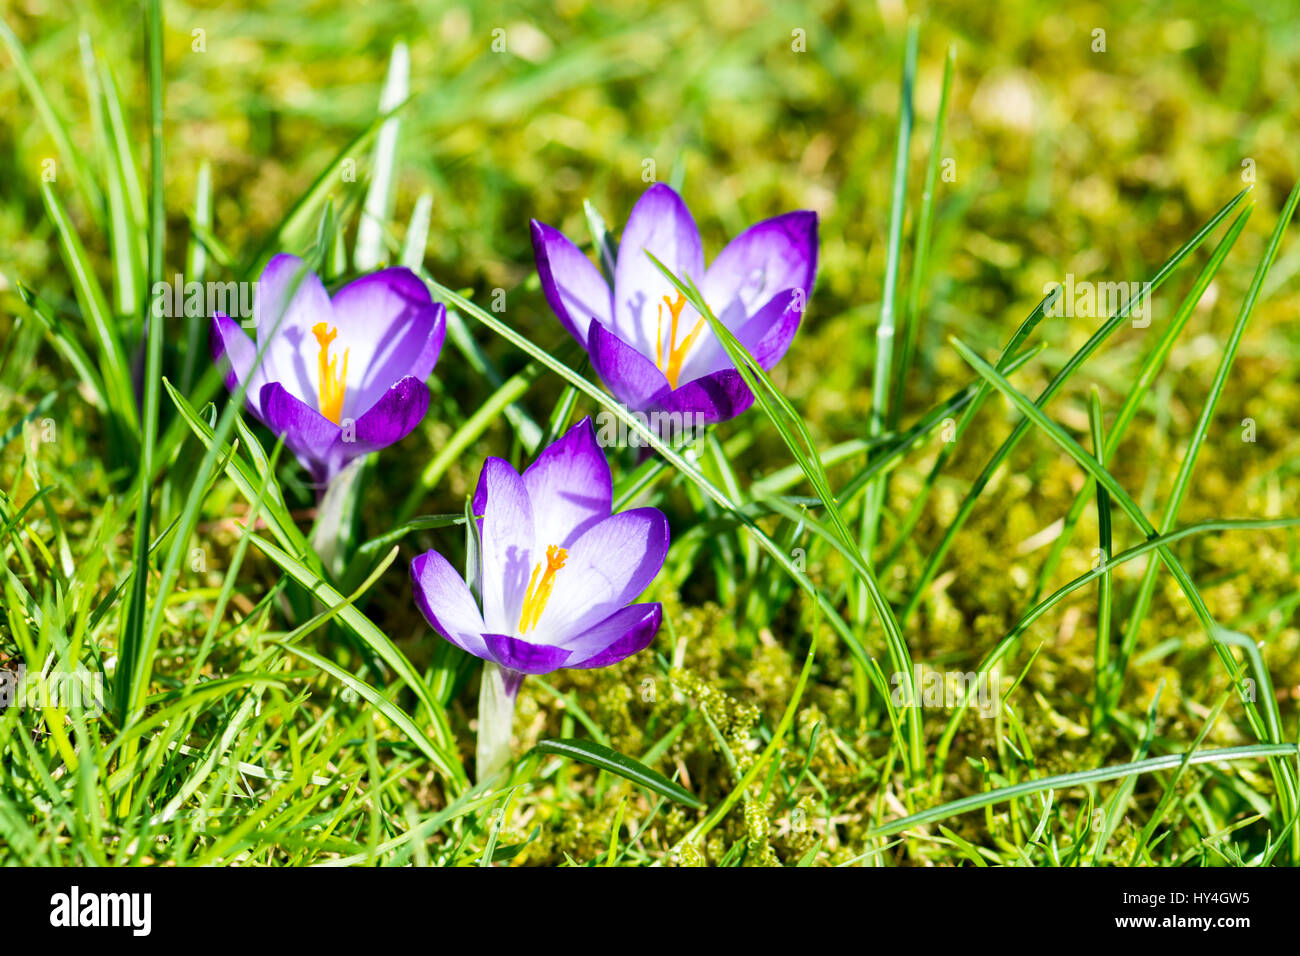 Blooming Spring Crocuses in a sunny spot Stock Photo